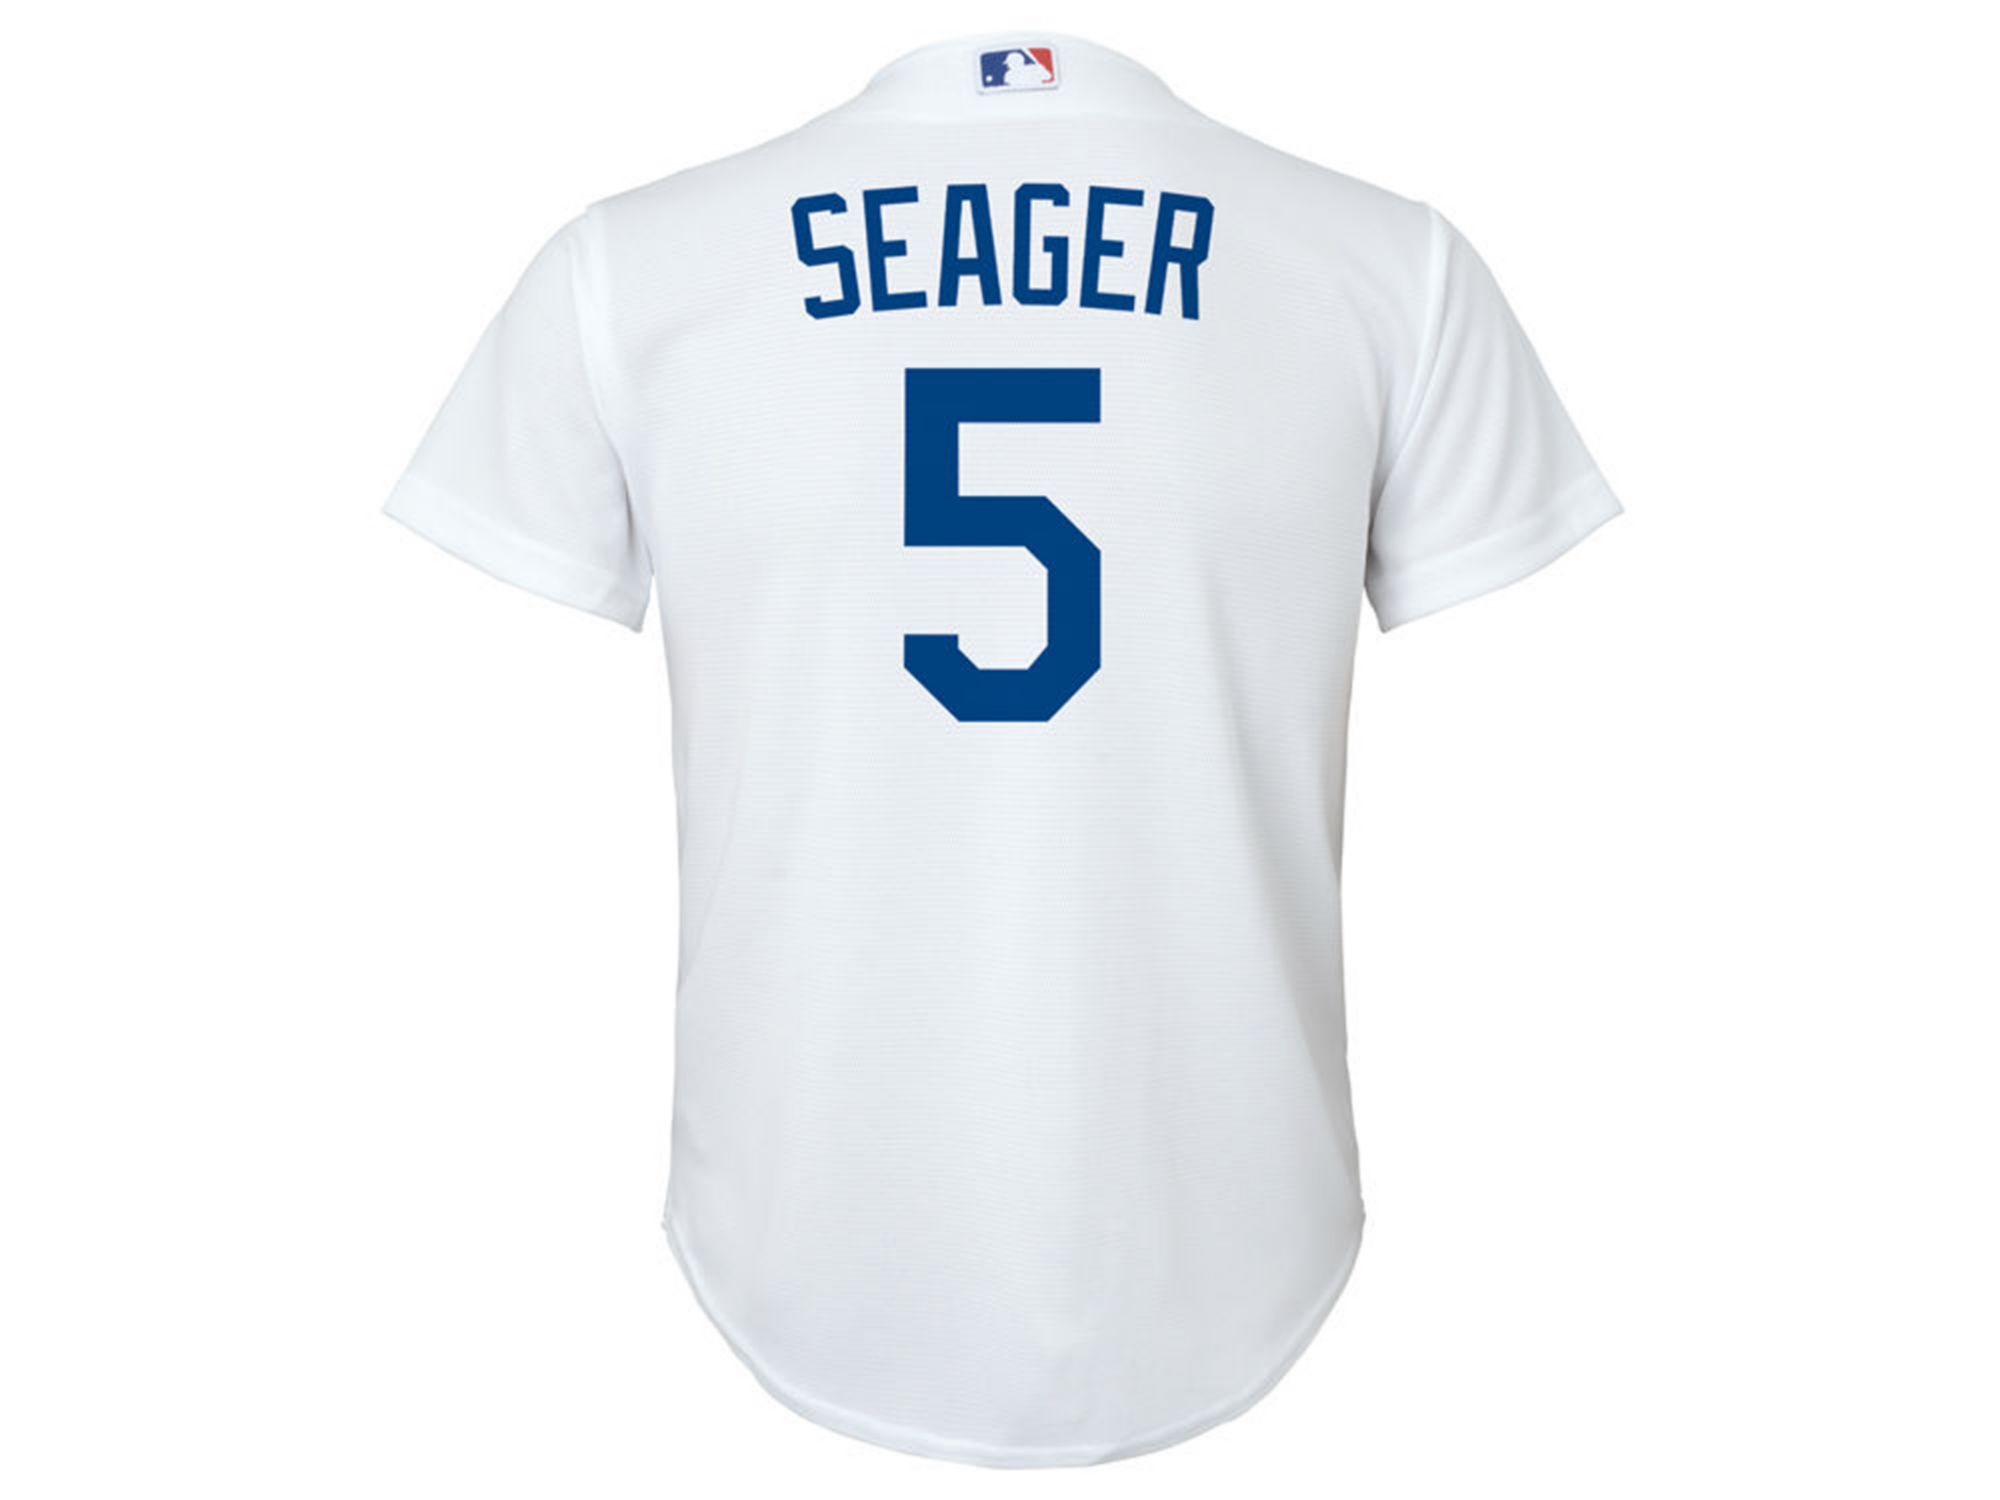 Nike Los Angeles Dodgers Youth Official Player Jersey Corey Seager & Reviews - Sports Fan Shop By Lids - Men - Macy's